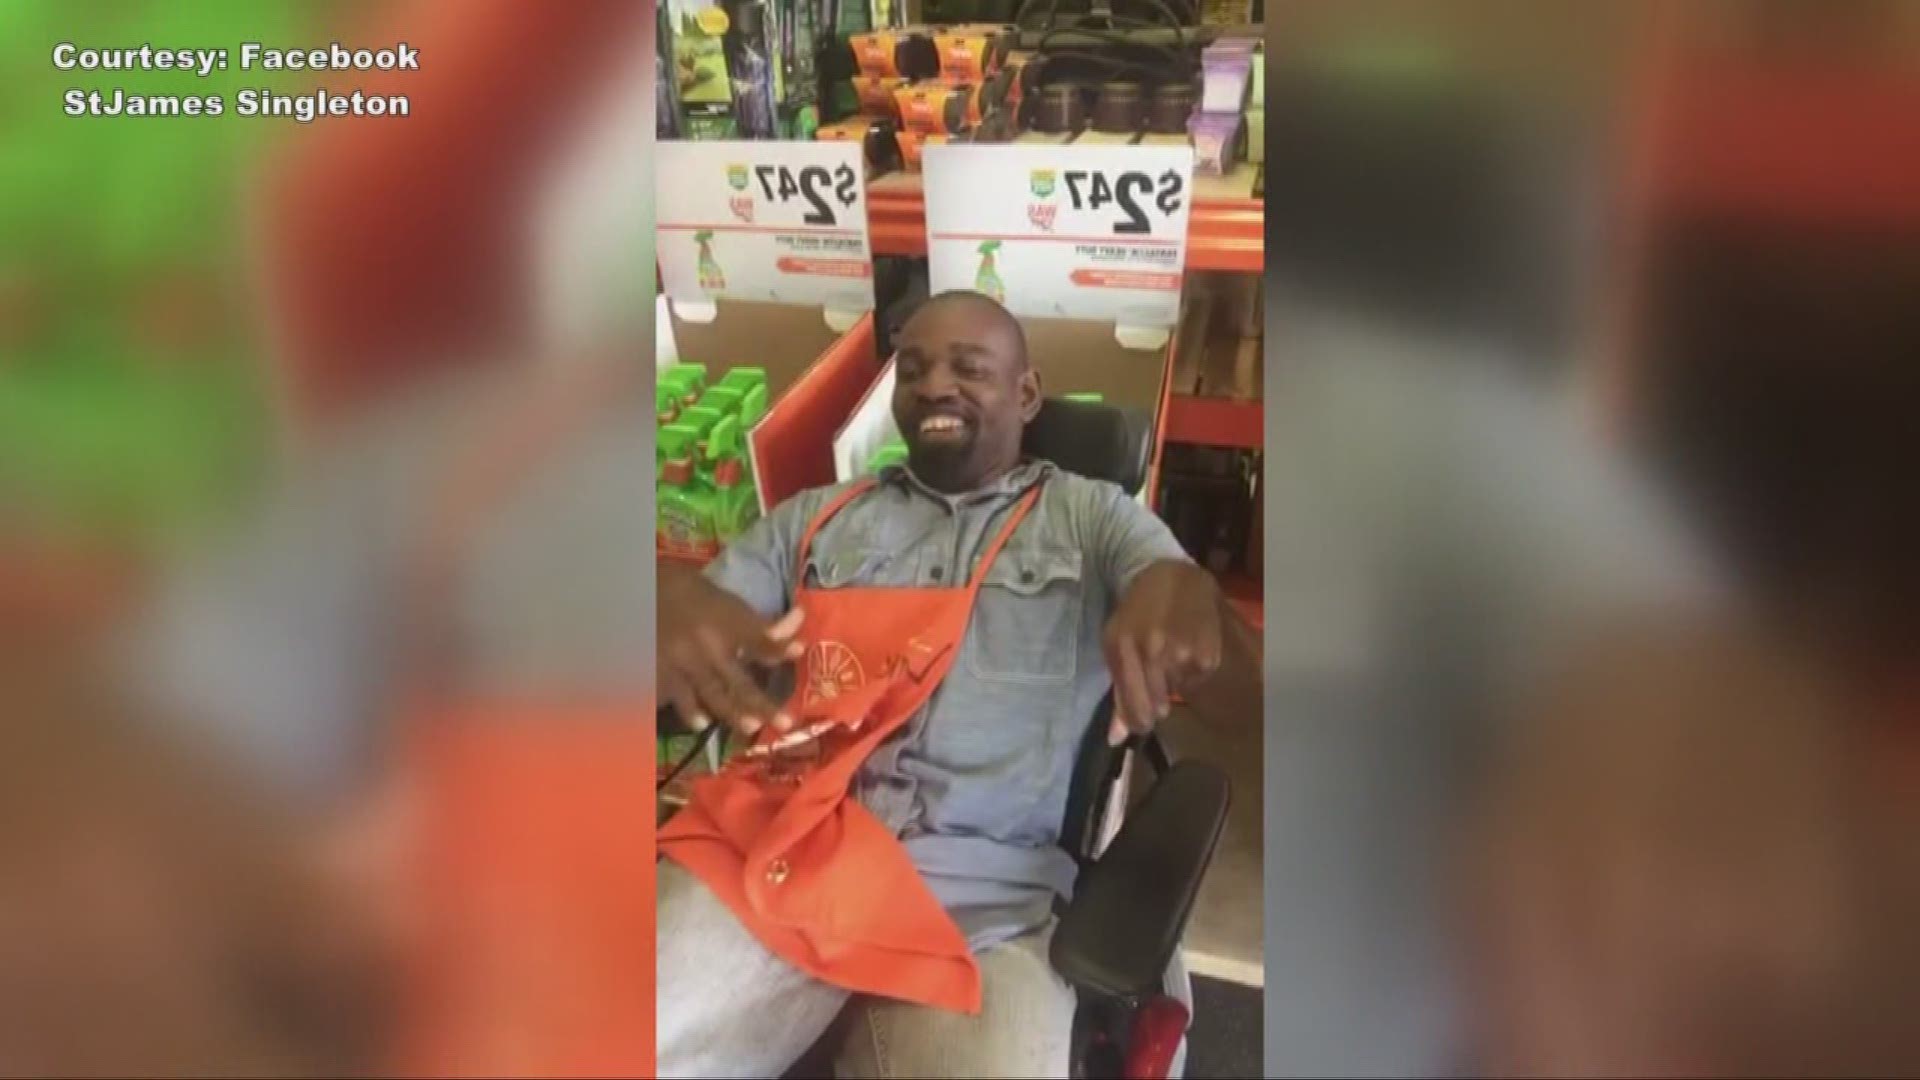 Home Depot greeter going viral with positivity